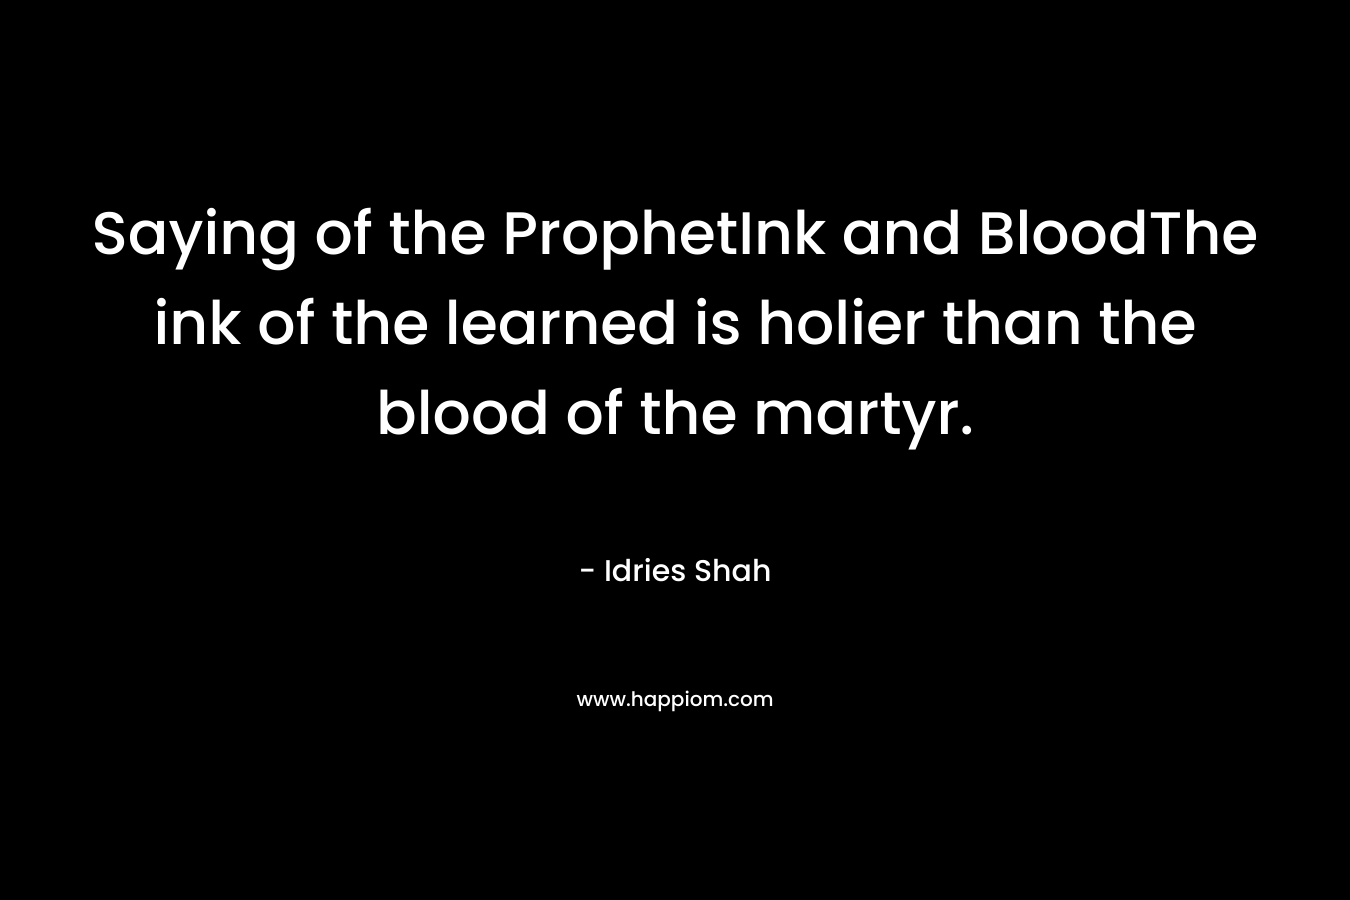 Saying of the ProphetInk and BloodThe ink of the learned is holier than the blood of the martyr. – Idries Shah